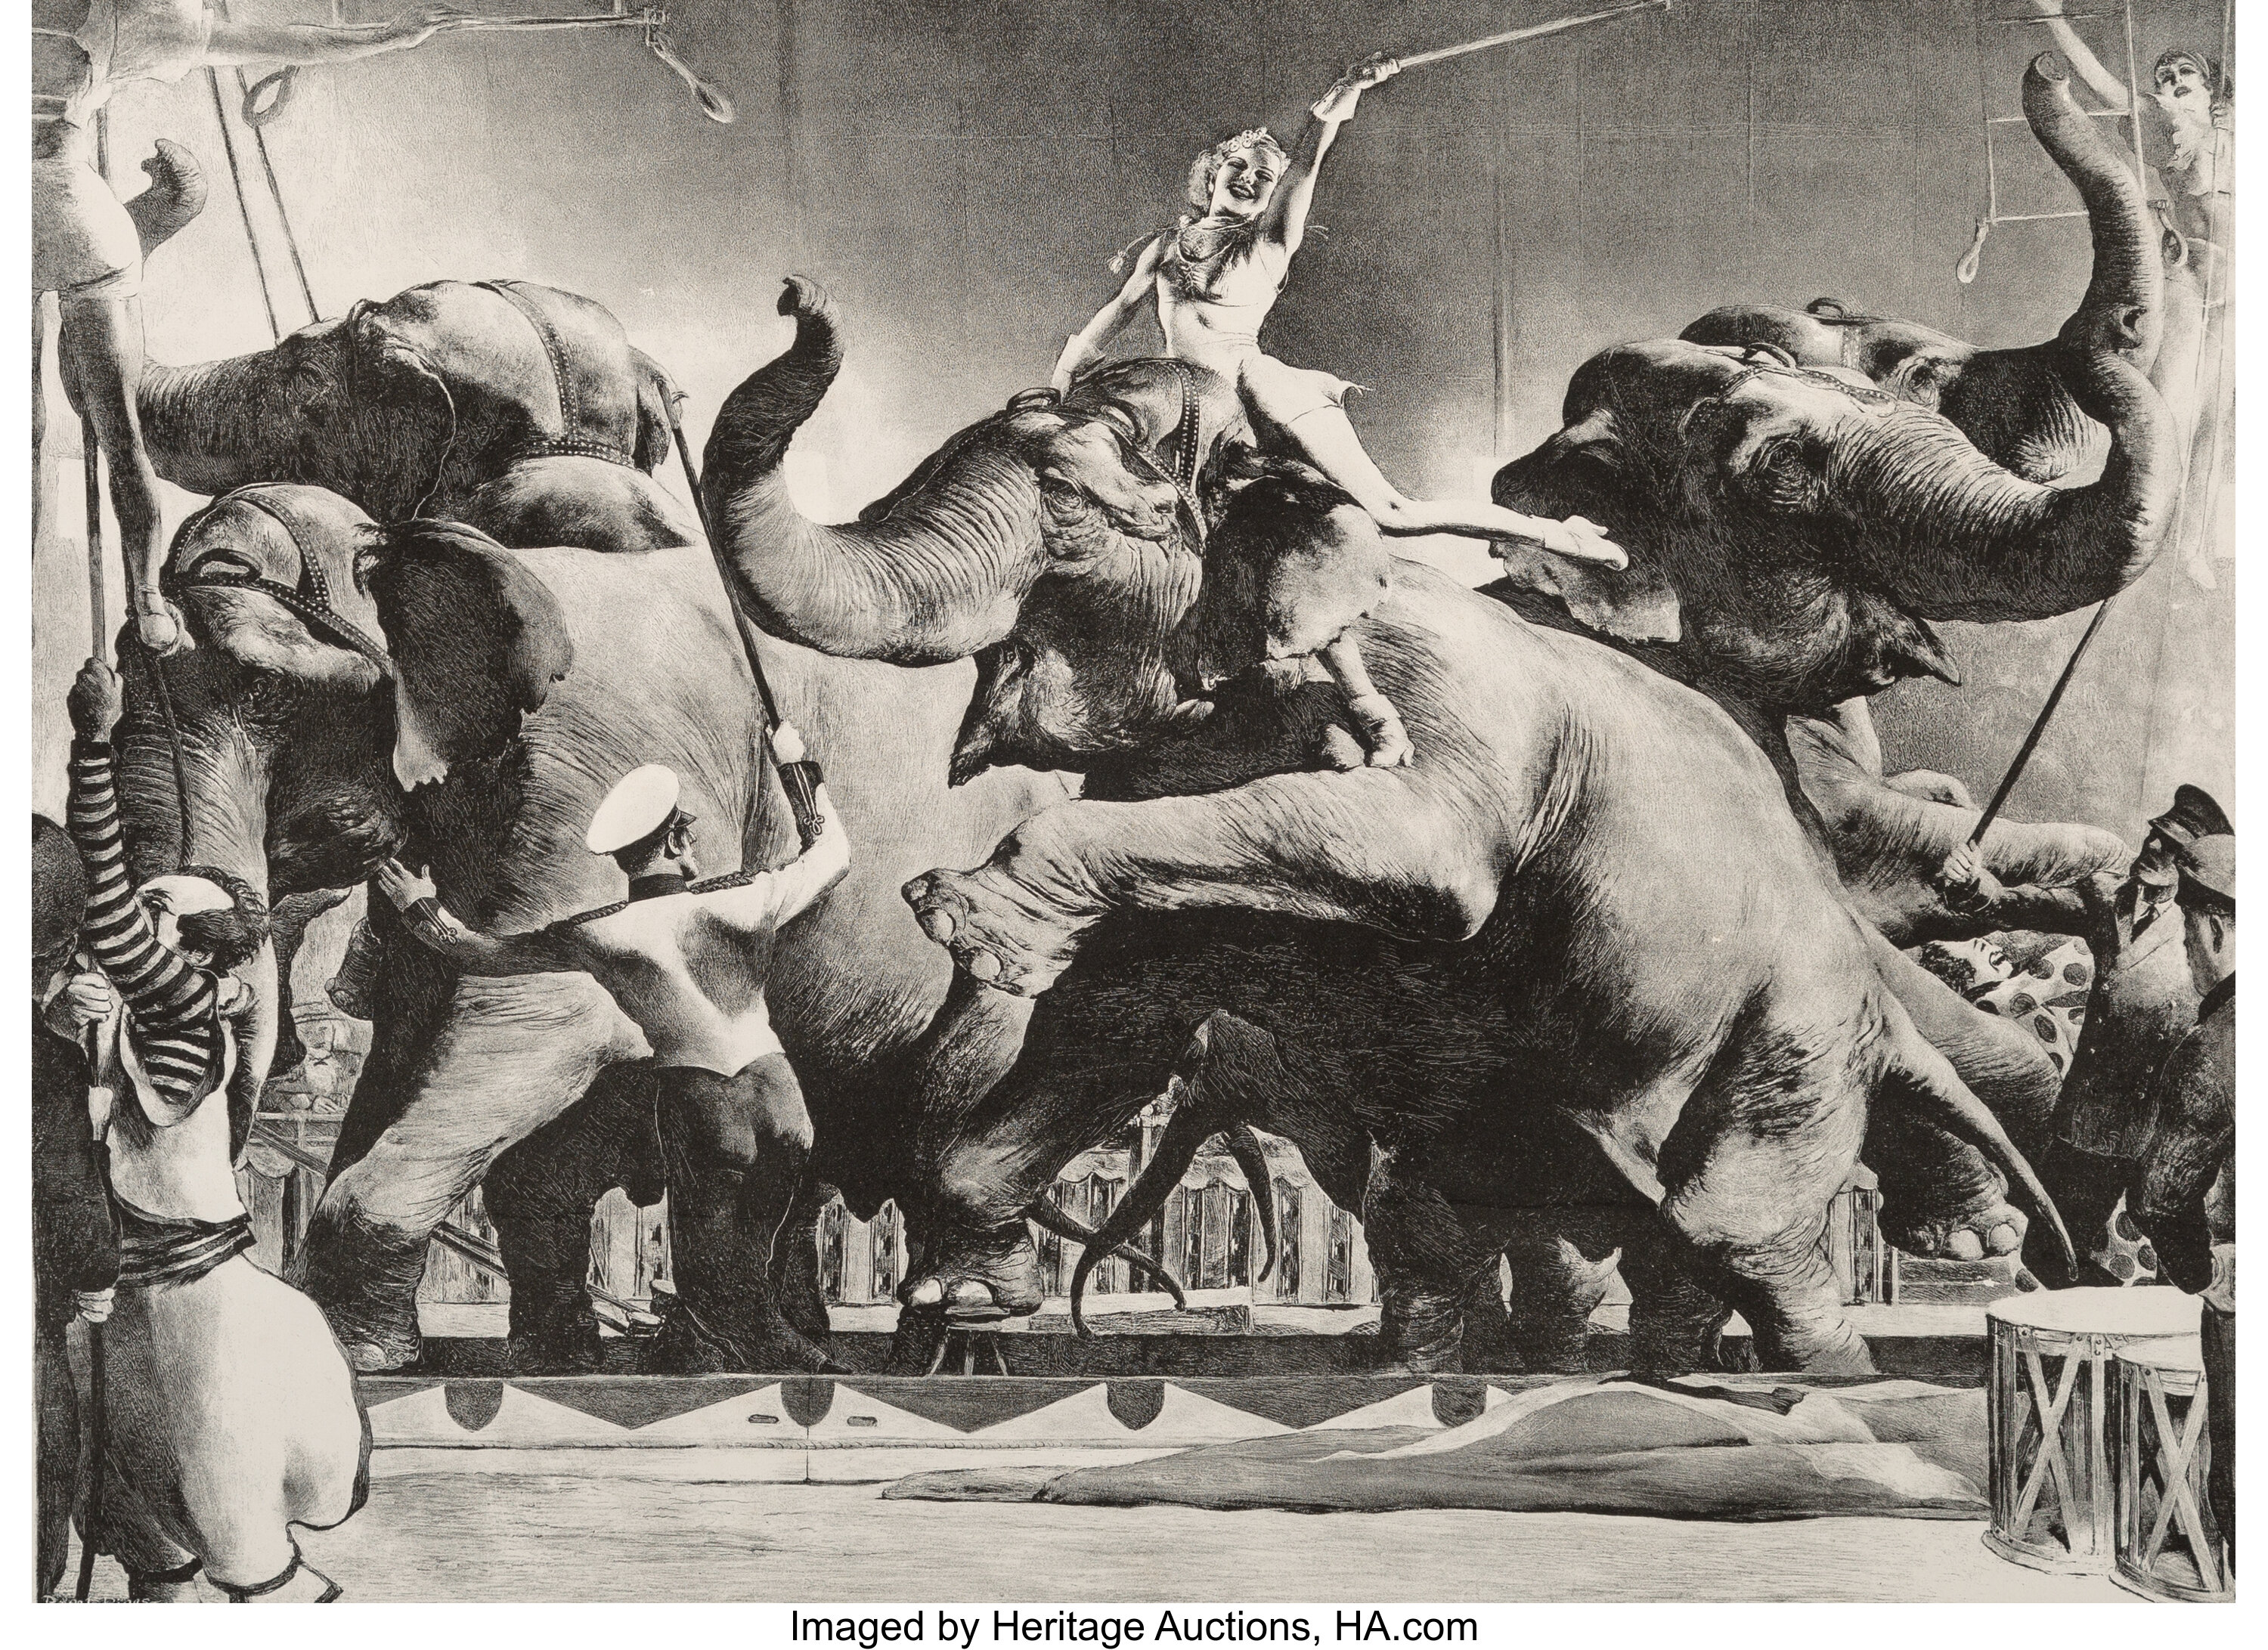 Robert Riggs (1896-1970). Elephant Act, 1935. Lithograph on paper